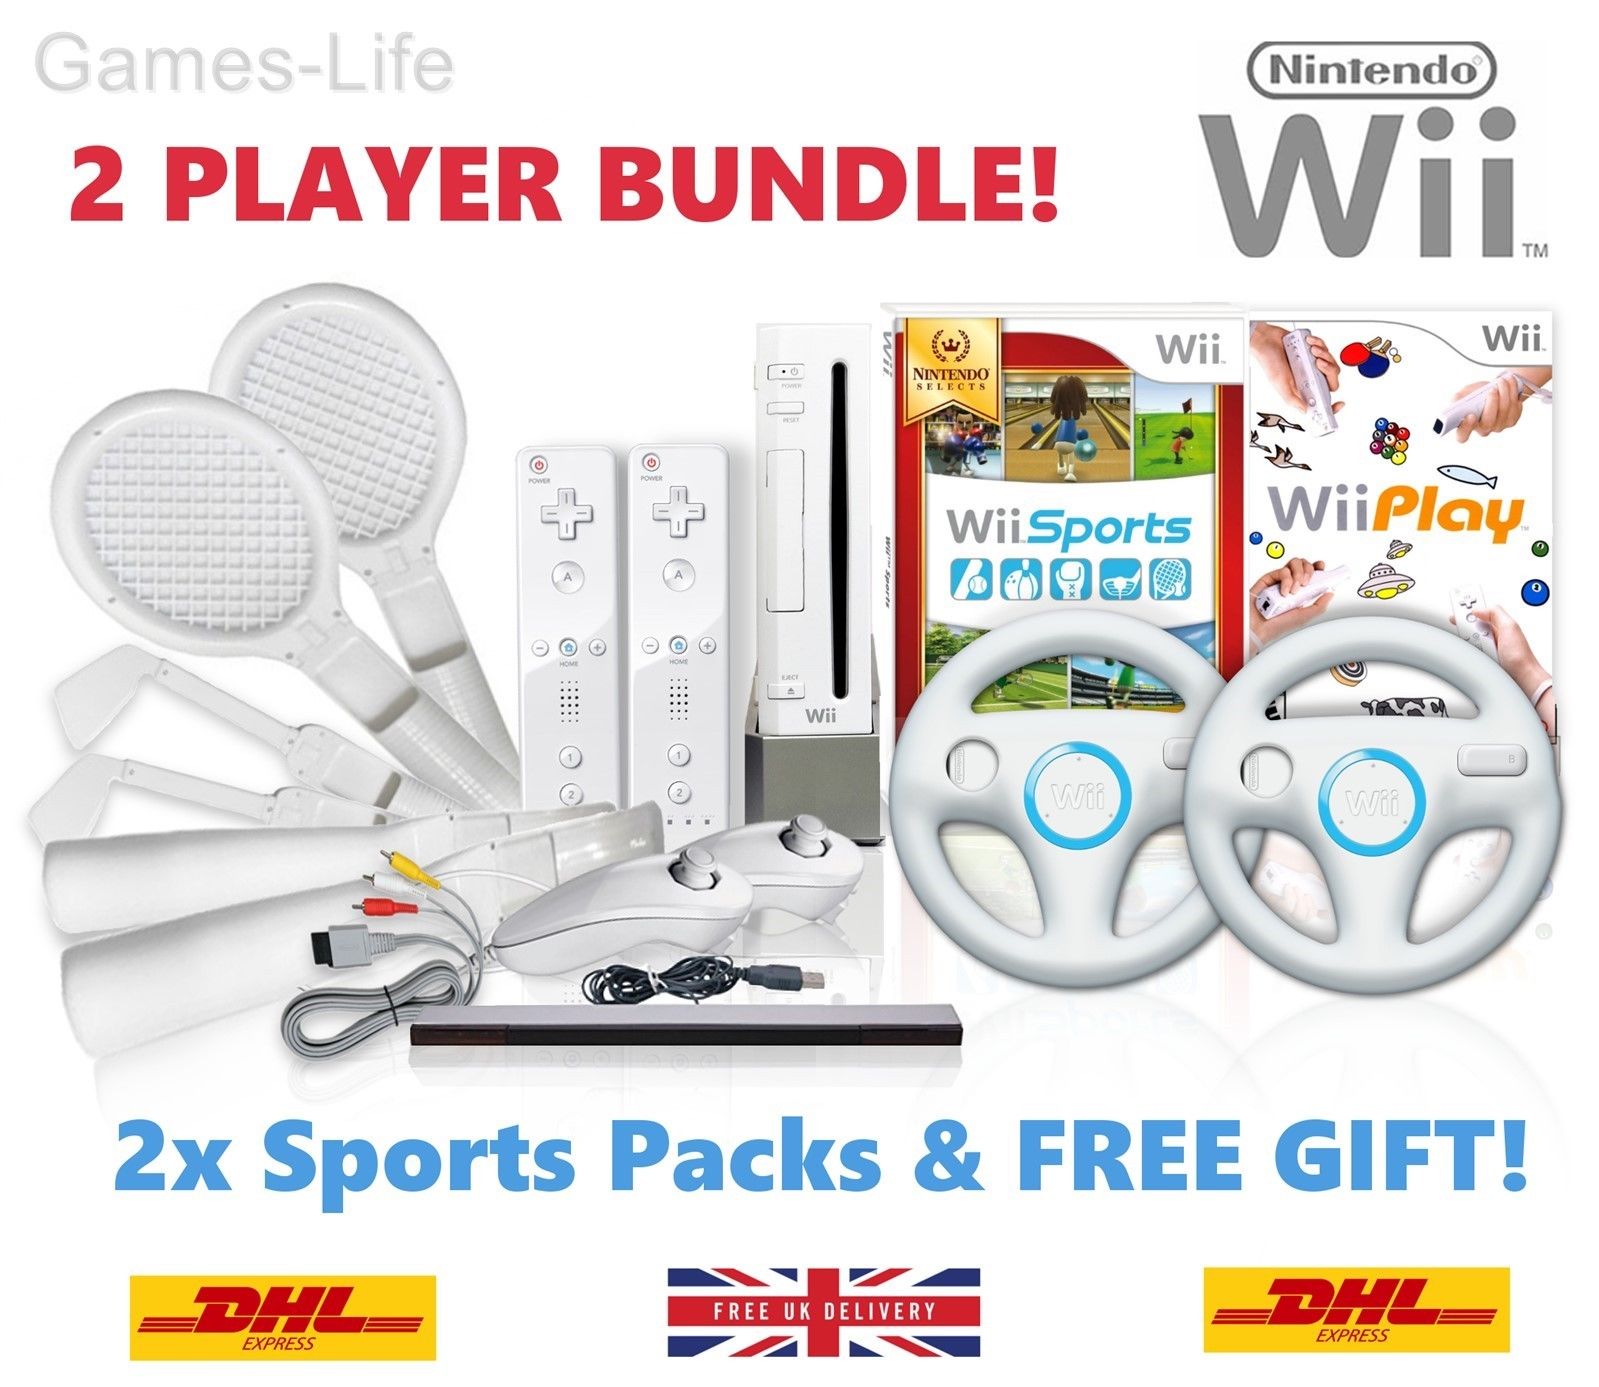 Wii Console 2 PLAYER, 2 Remotes, Sports Packs, 14 GAMES Wii Sports & Play +GIFT!